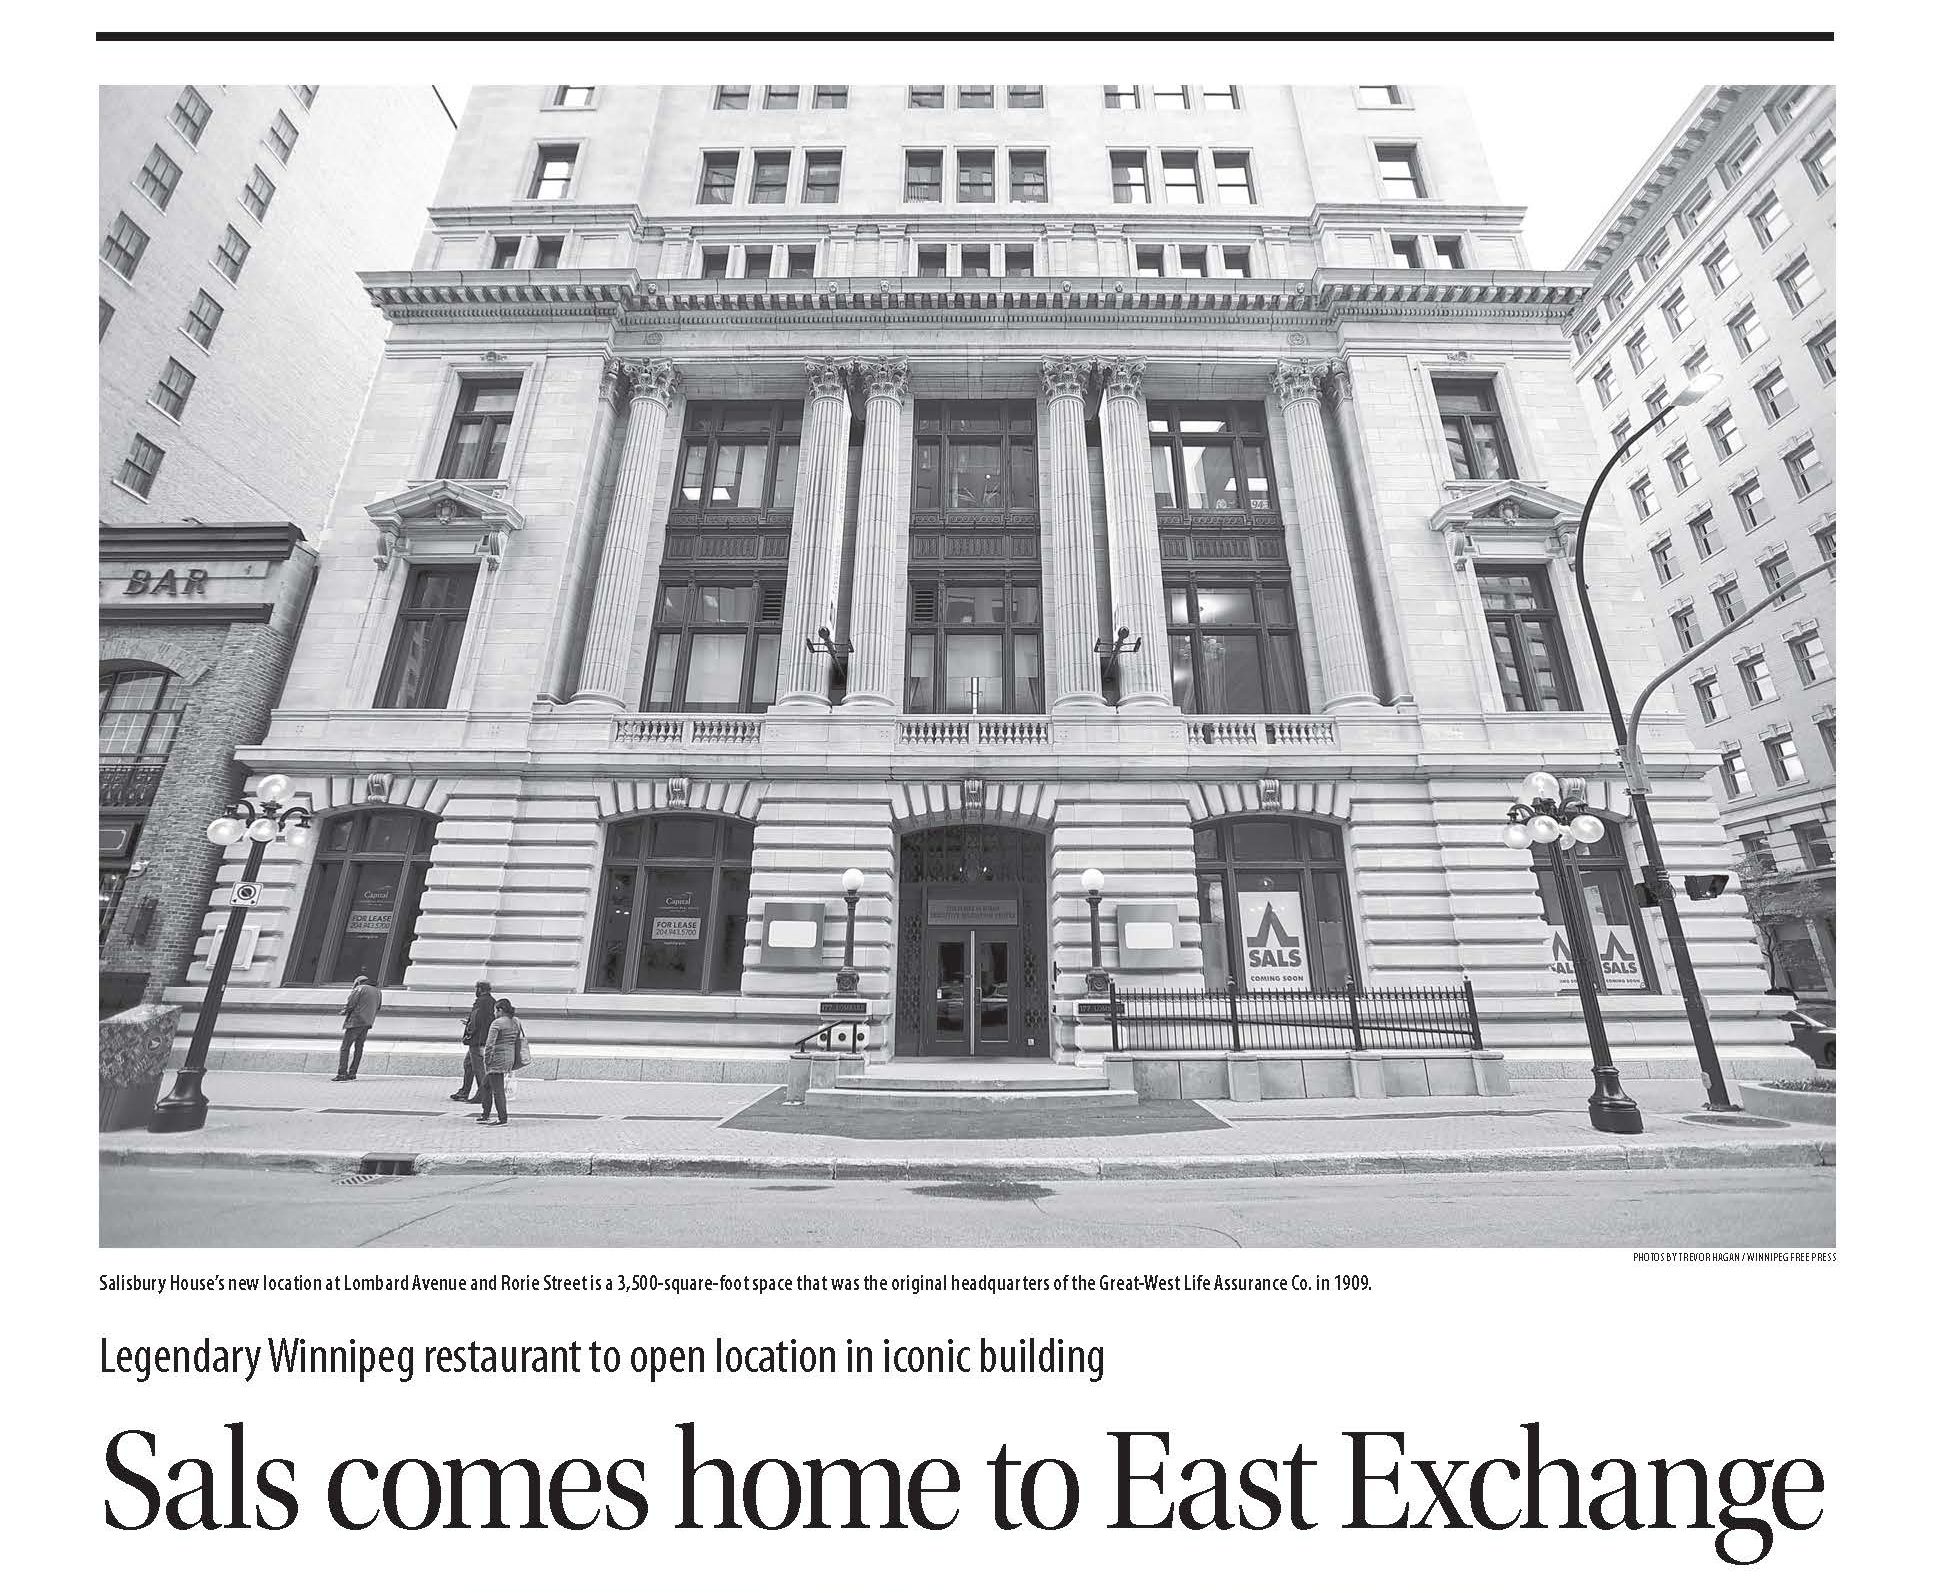 Salisbury House comes home to the East Exchange District